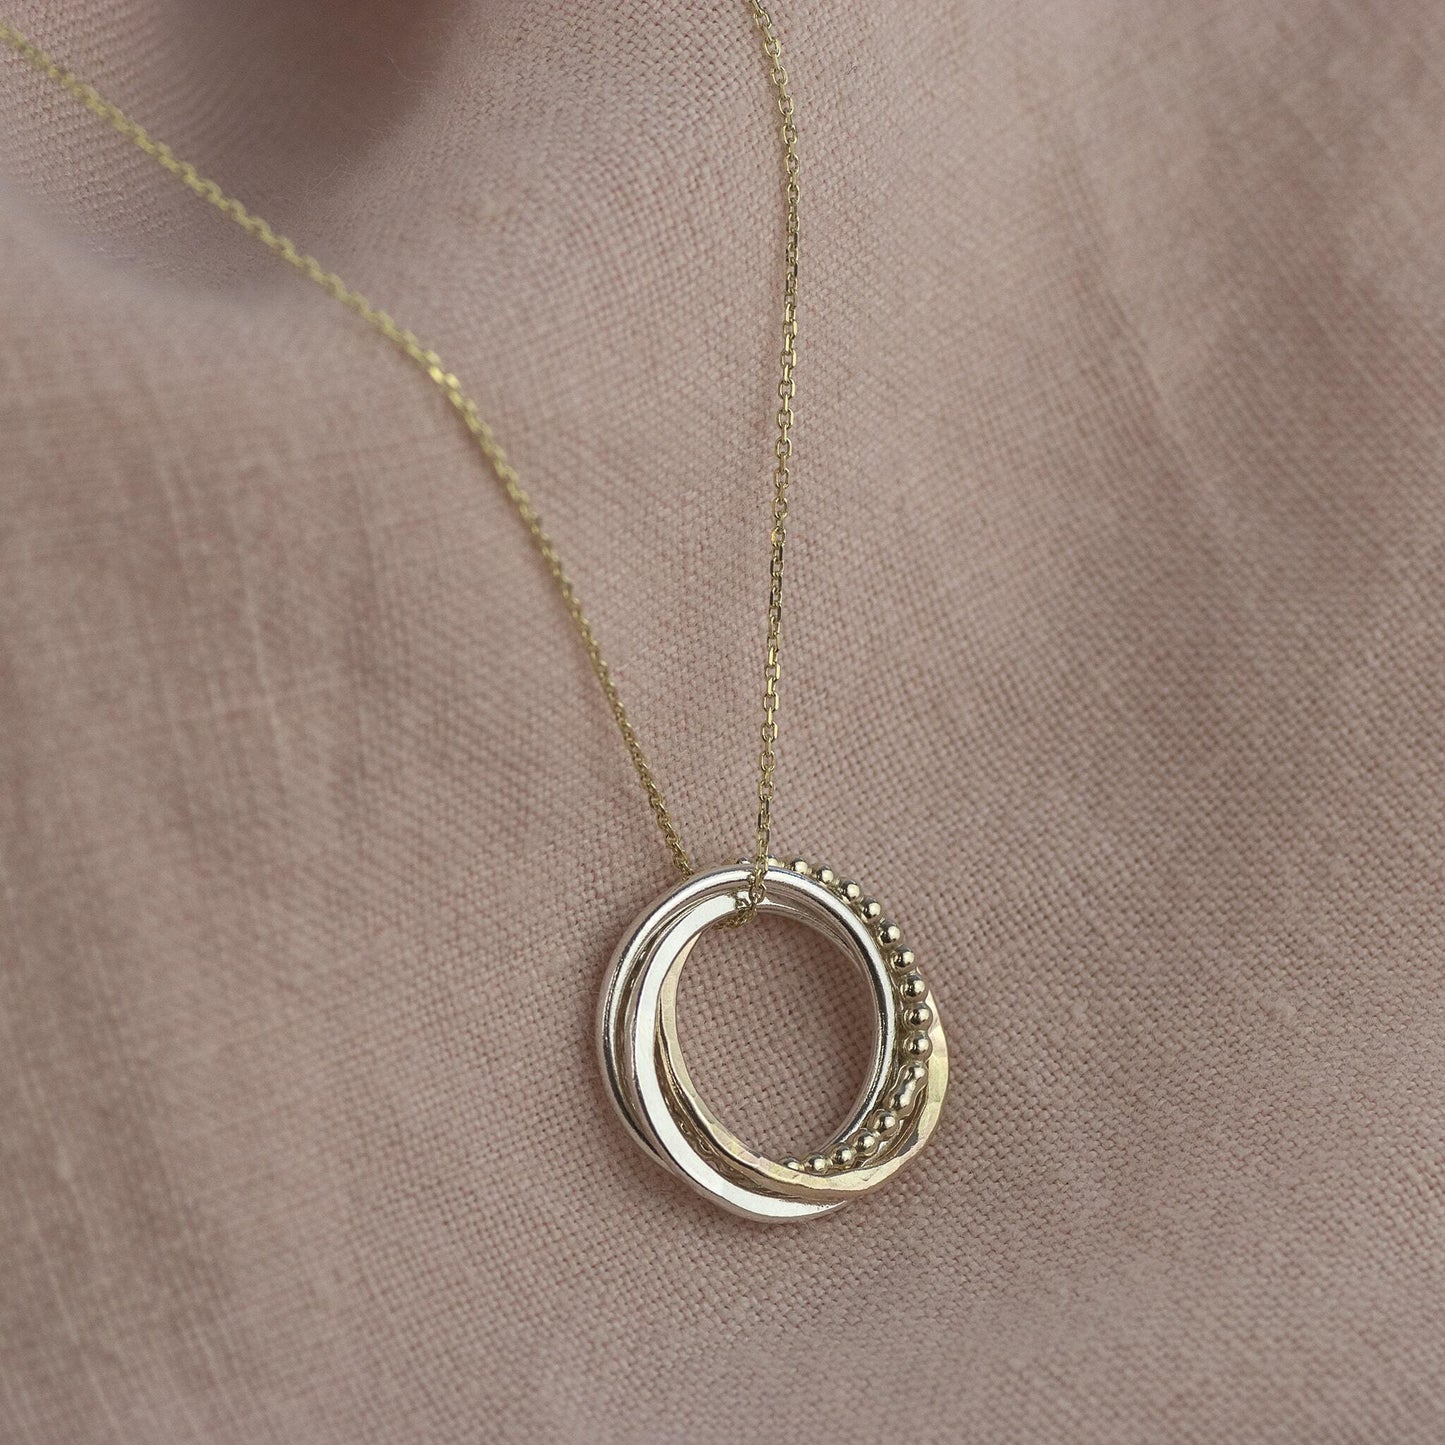 9kt Gold 5th Anniversary Necklace - The Original 5 Rings for 5 Years Necklace